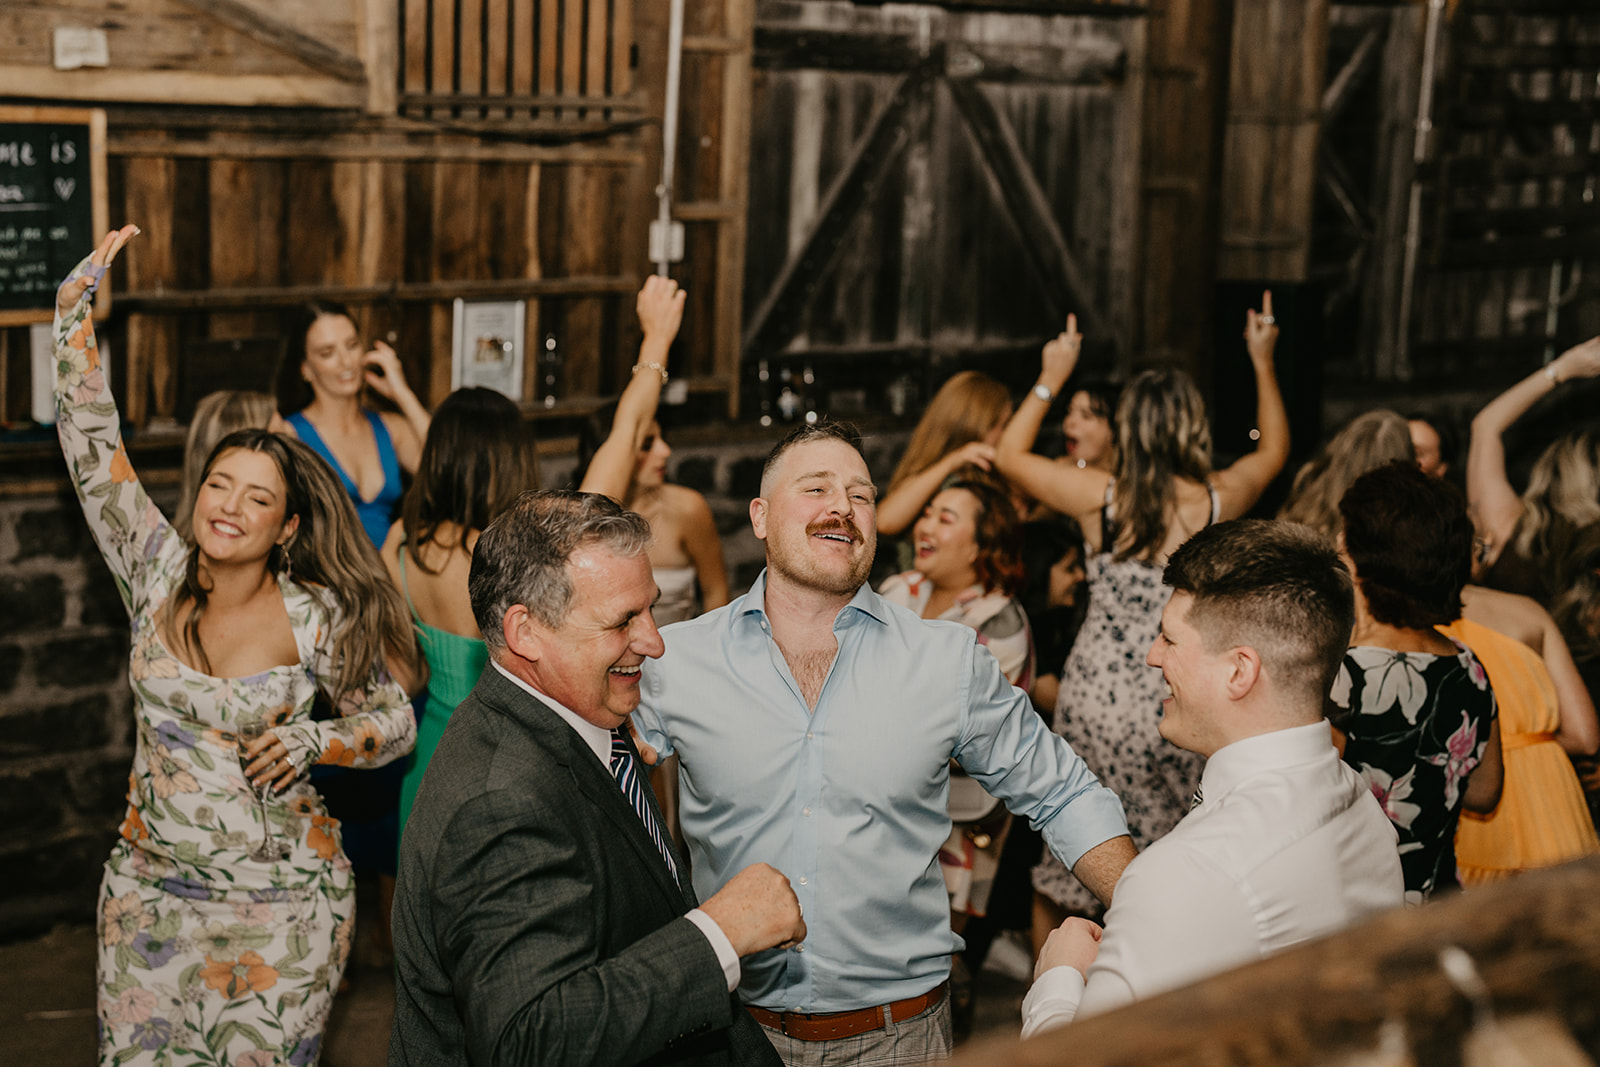 Candid wedding party captures by the berhardts at Collingwood children's farm wedding photography